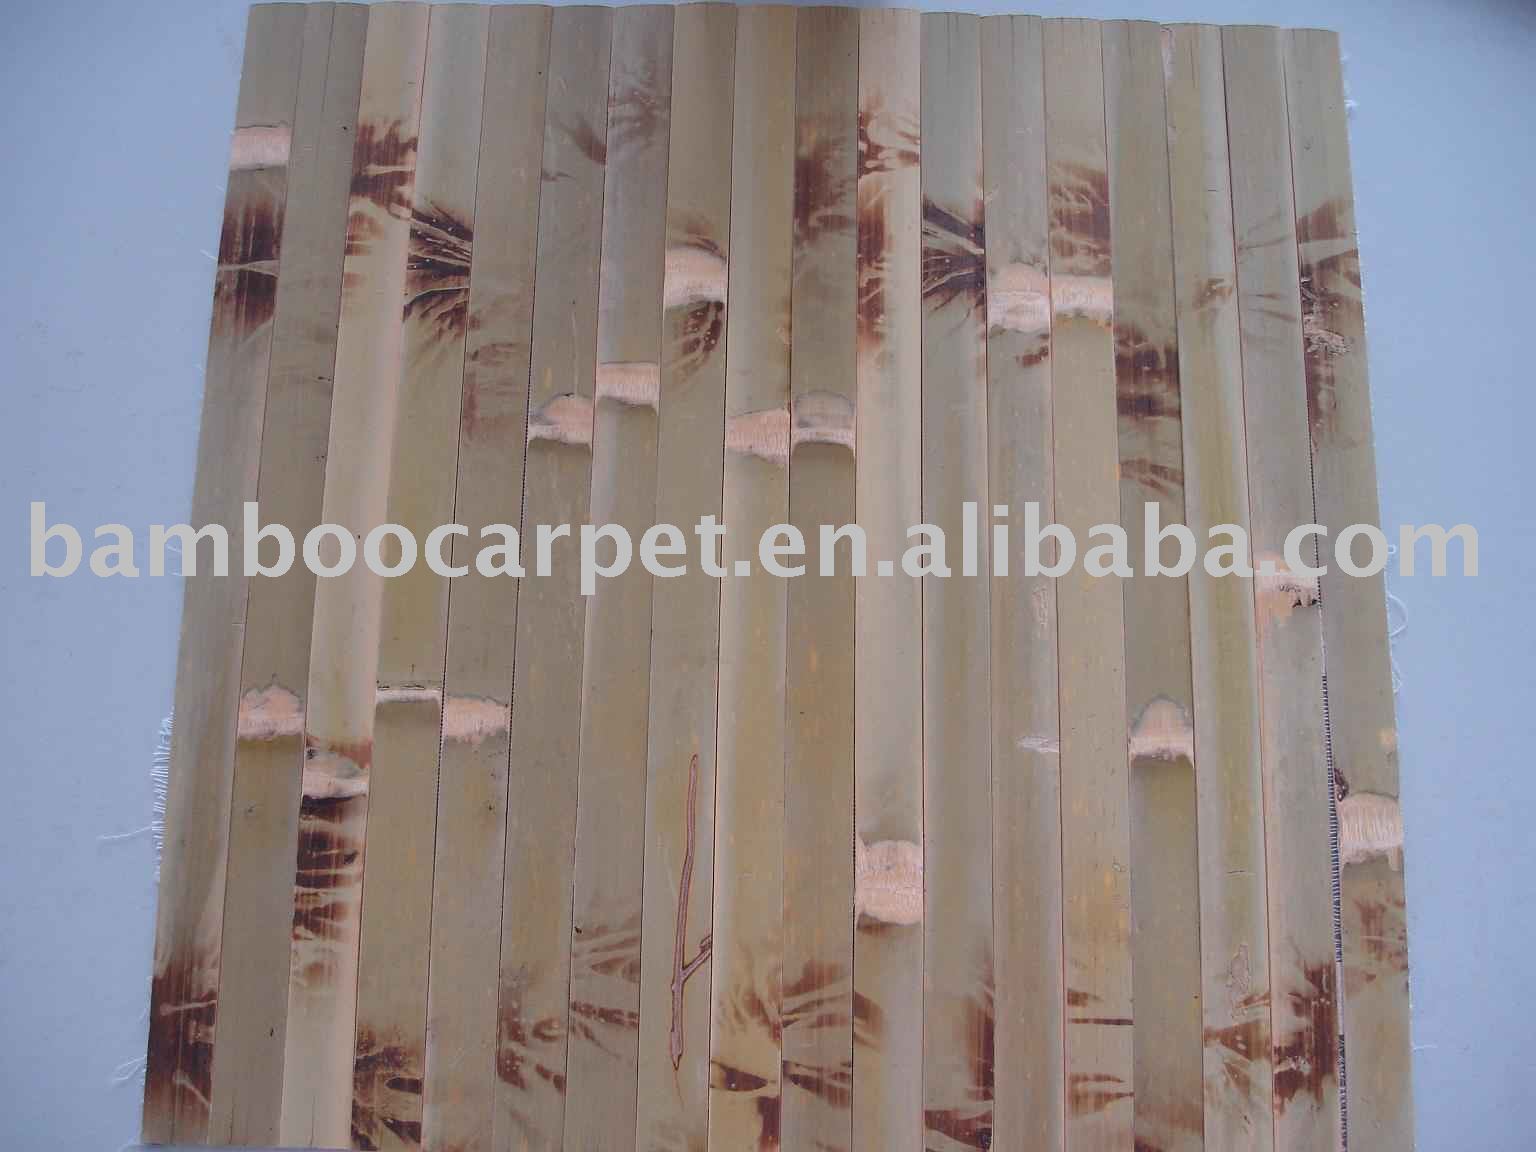 See larger image: natural bamboo wallpaper. Add to My Favorites